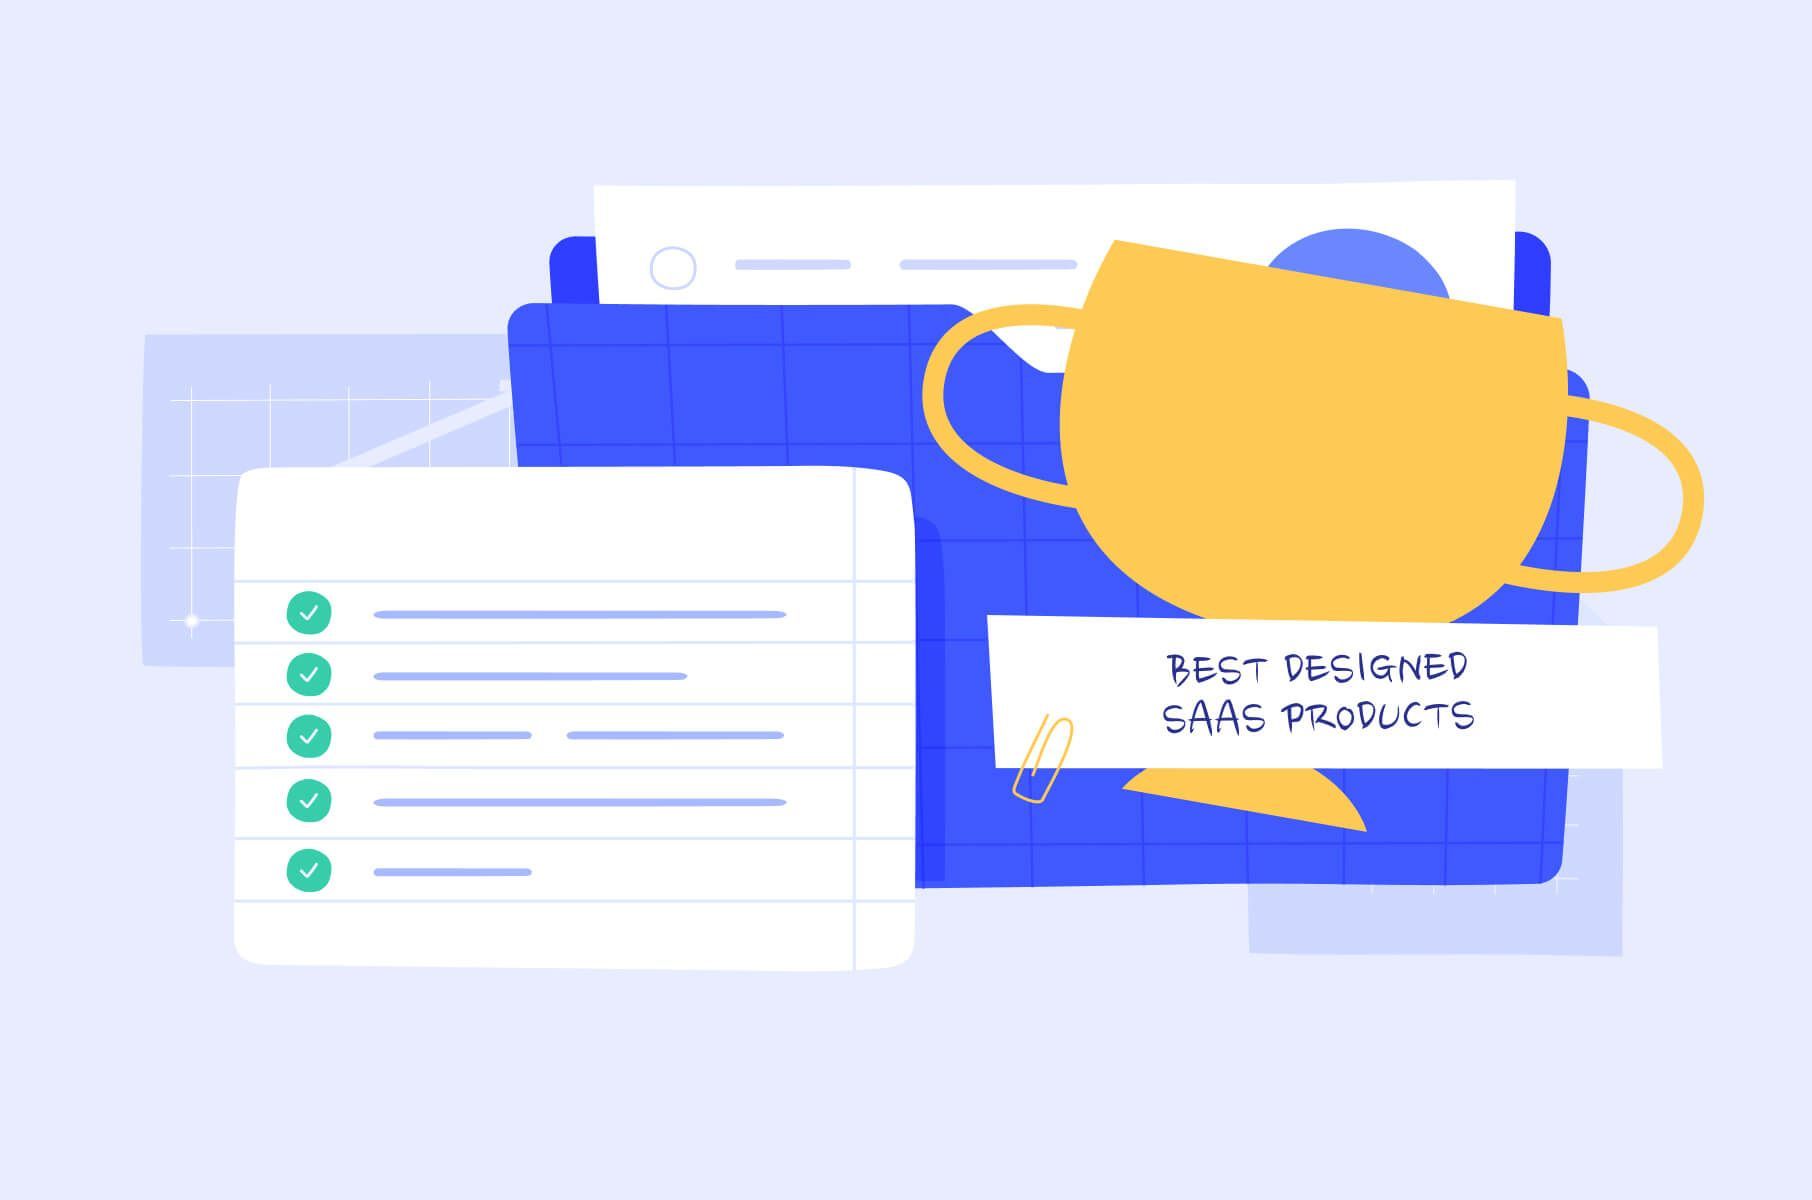 9 best-designed SaaS products we’ve seen so far